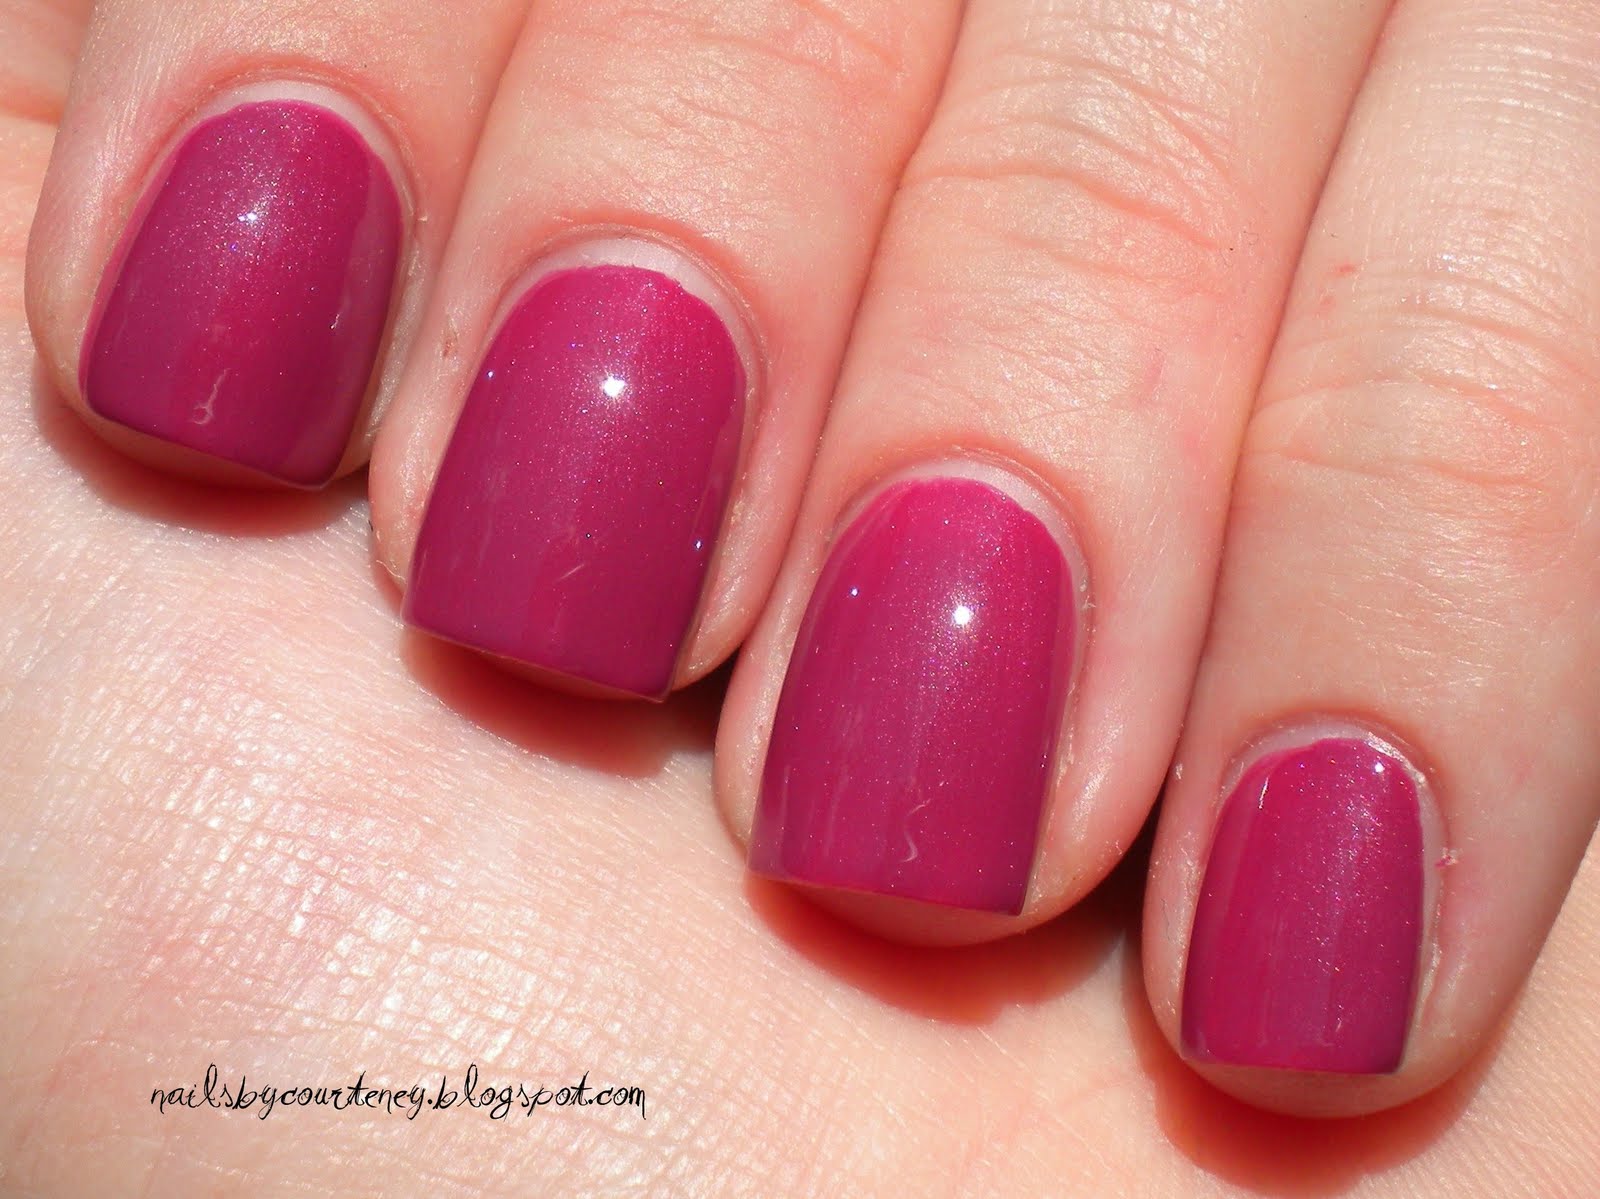 10. "Mauve Mirage" Nail Lacquer by Orly - wide 2